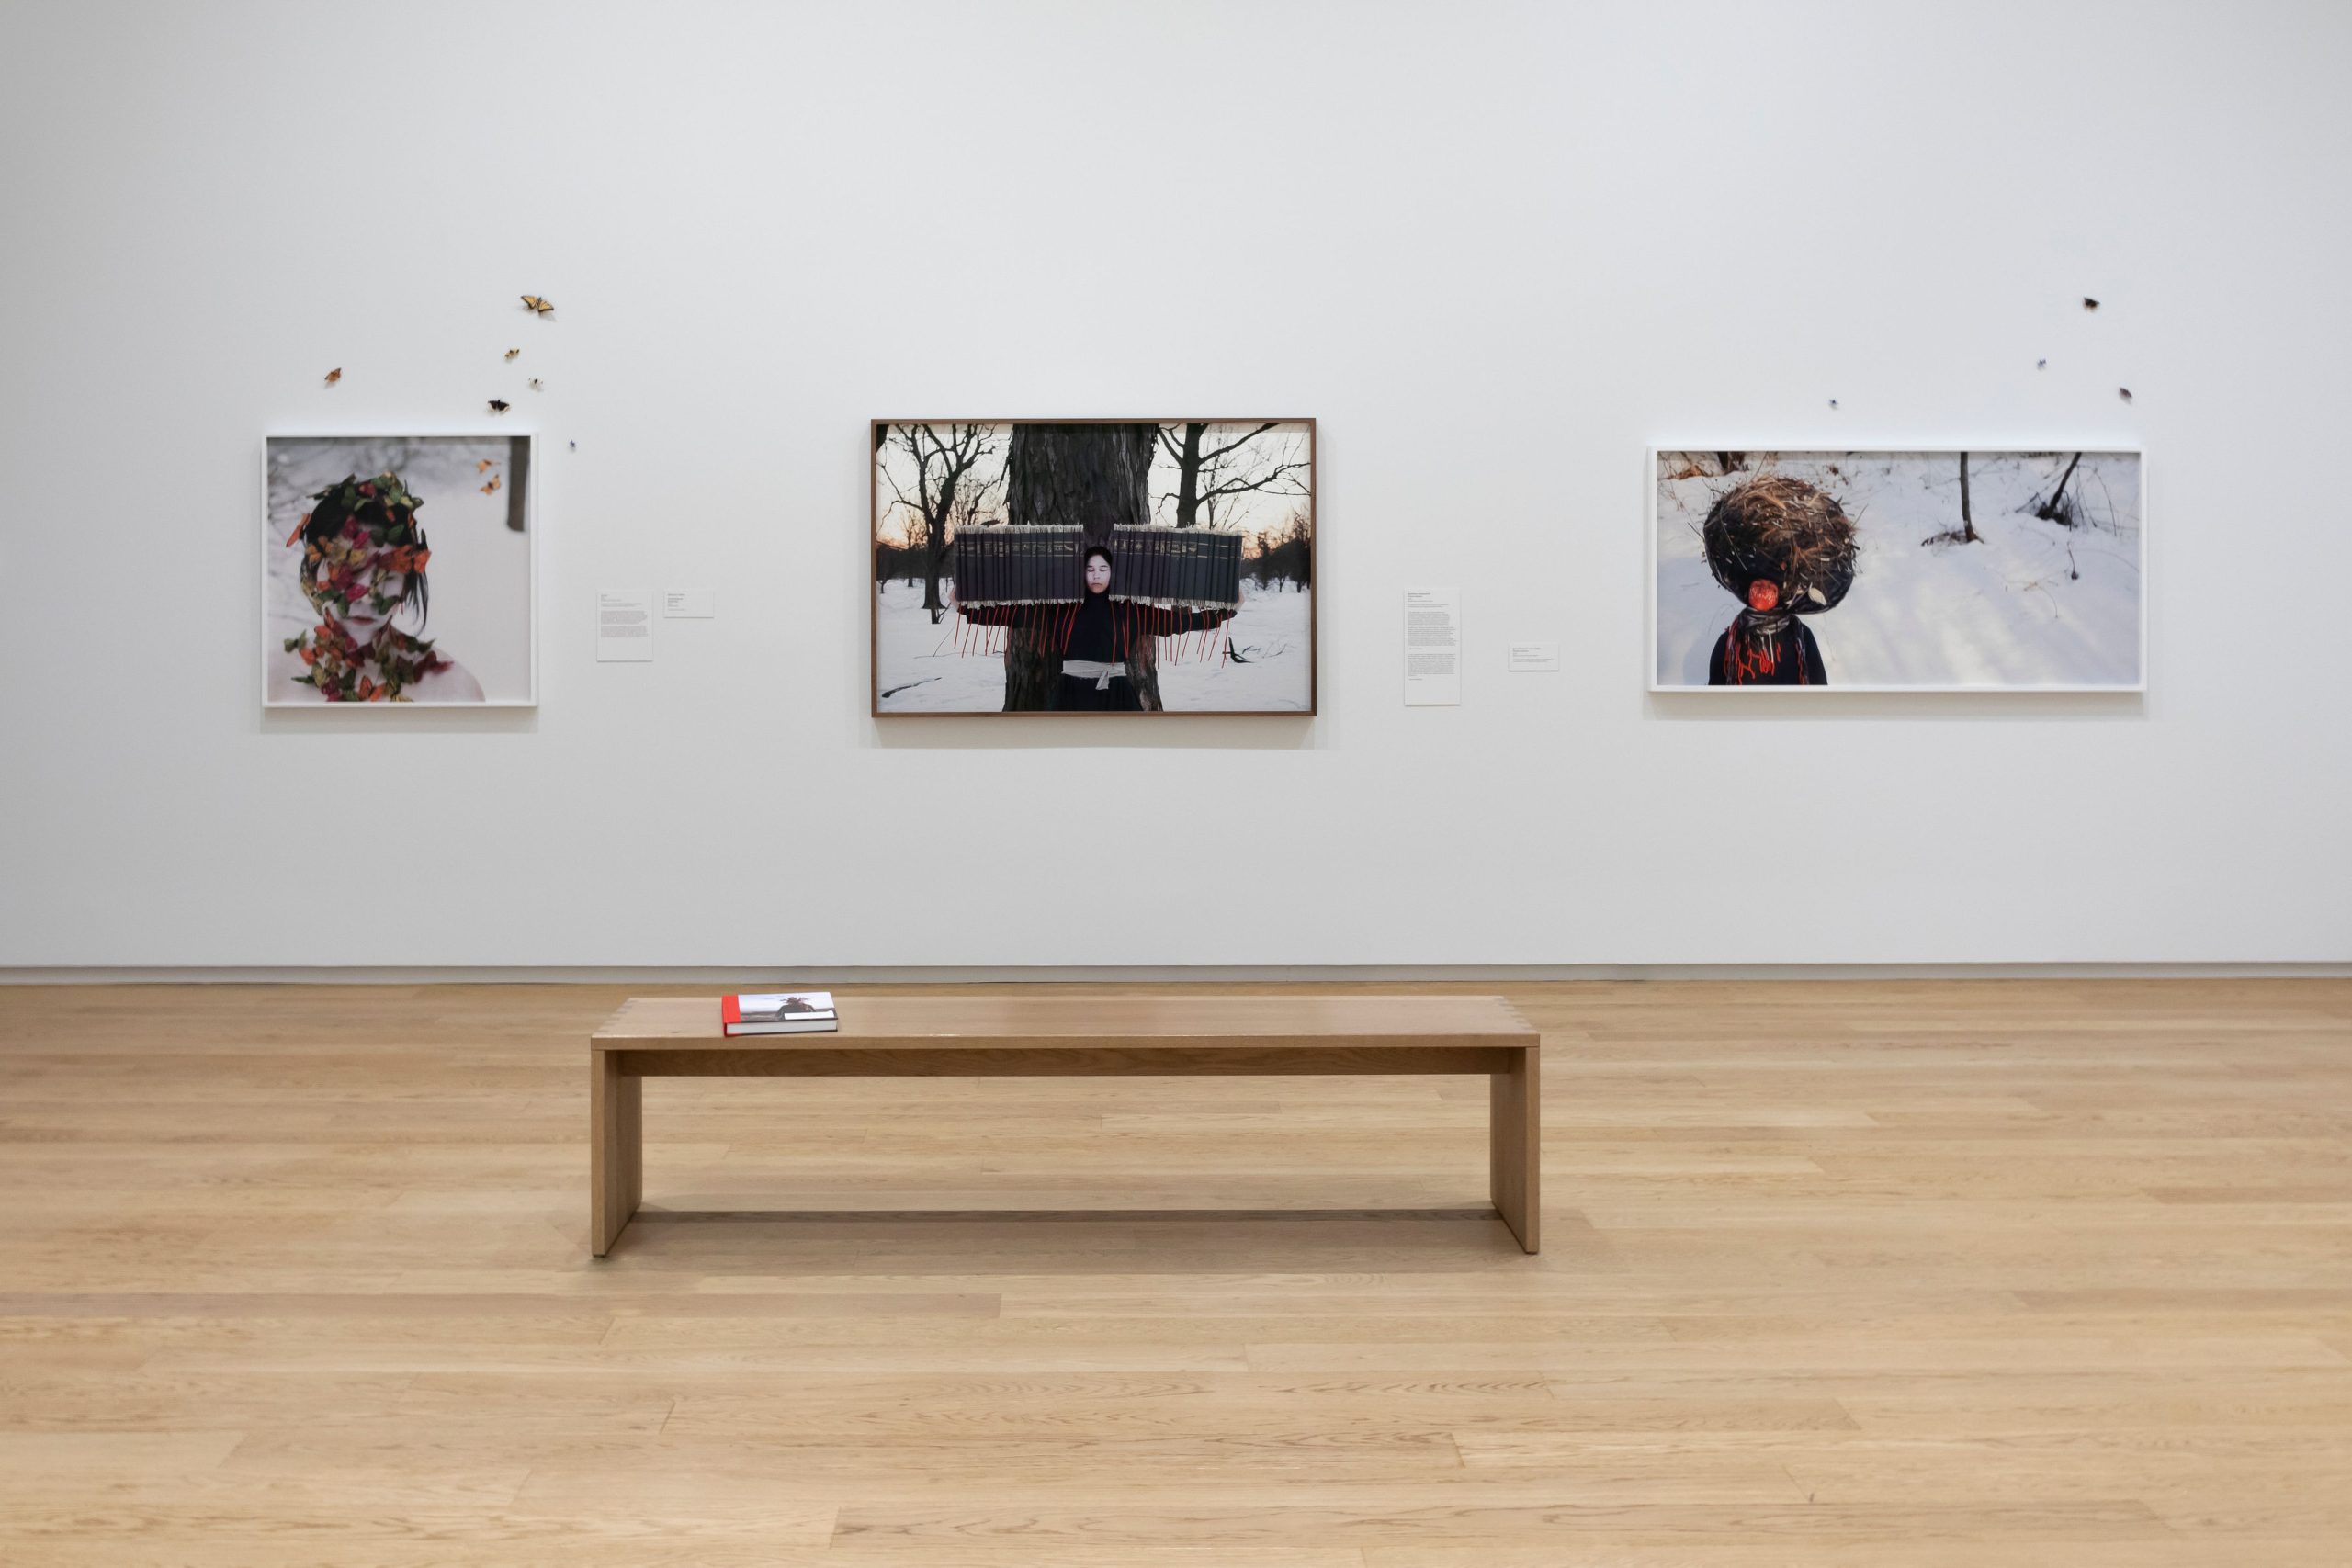 A gallery room displays three Meryl McMaster photographs, with butterflies attached to the wall alongside them. A bench sits in the centre of the room with an exhibition catalogue on it.